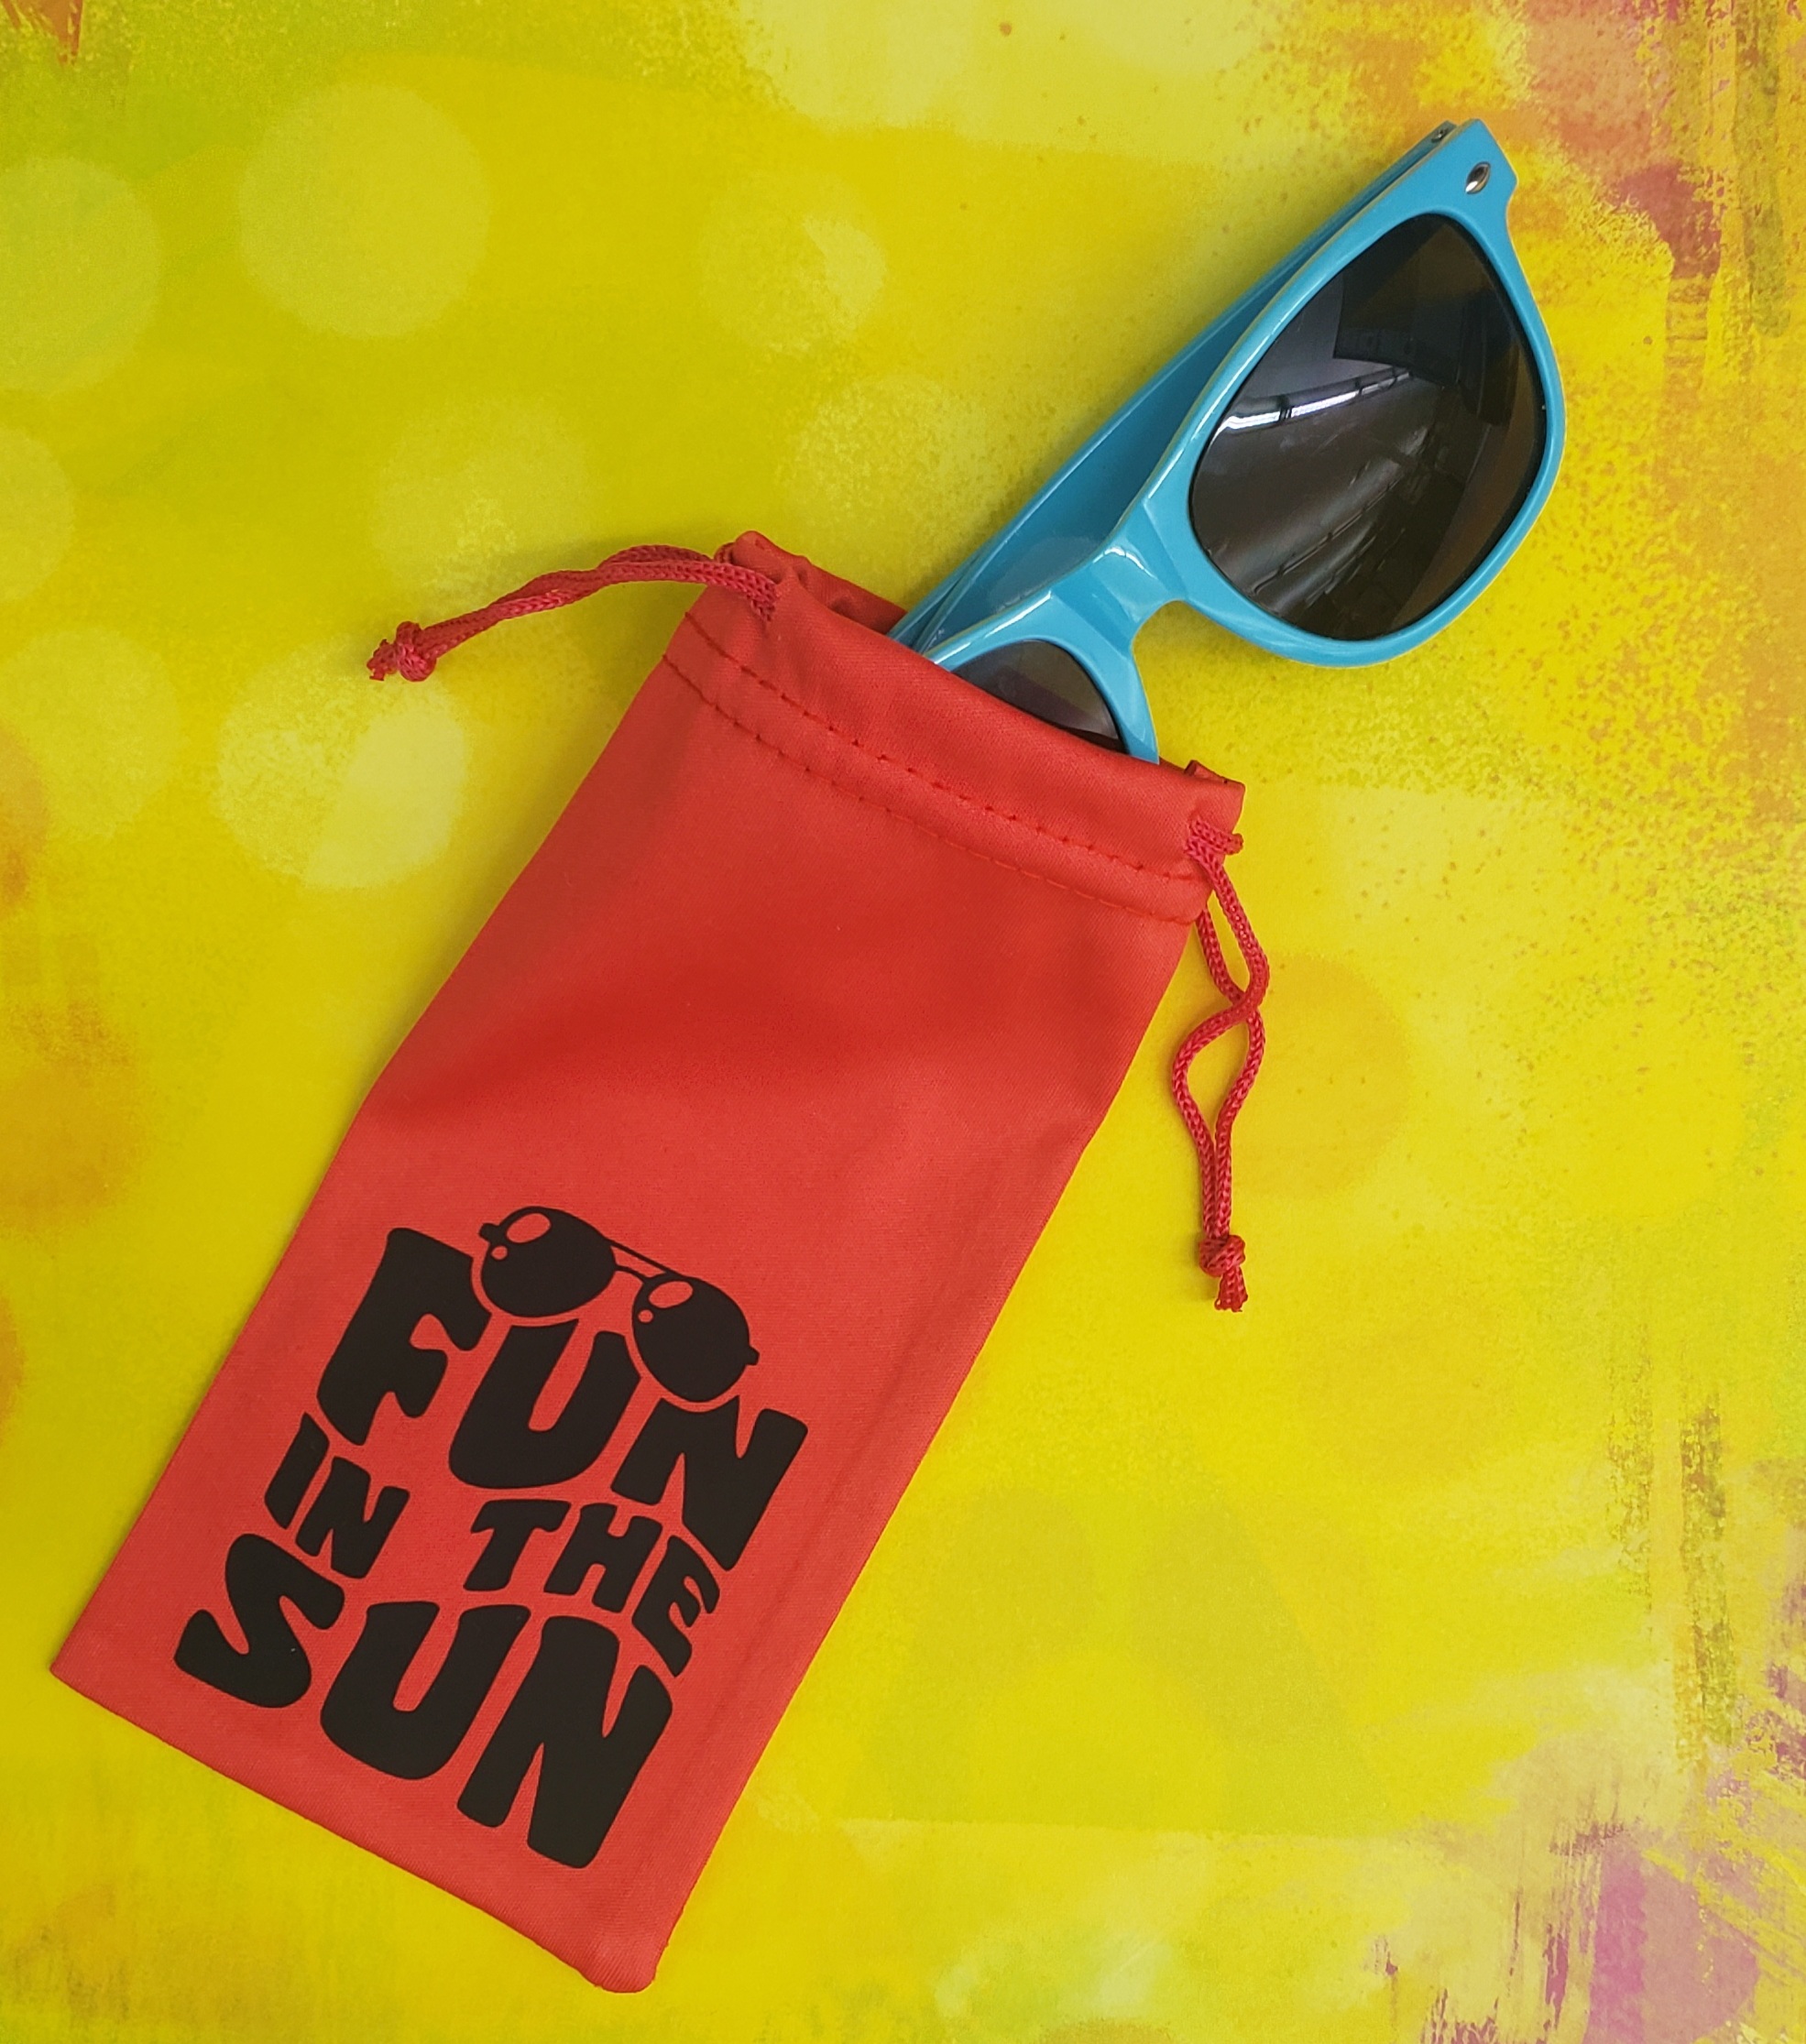 red sunglass case reading "Fun in the Sun" on a yellow background with blue sunglasses